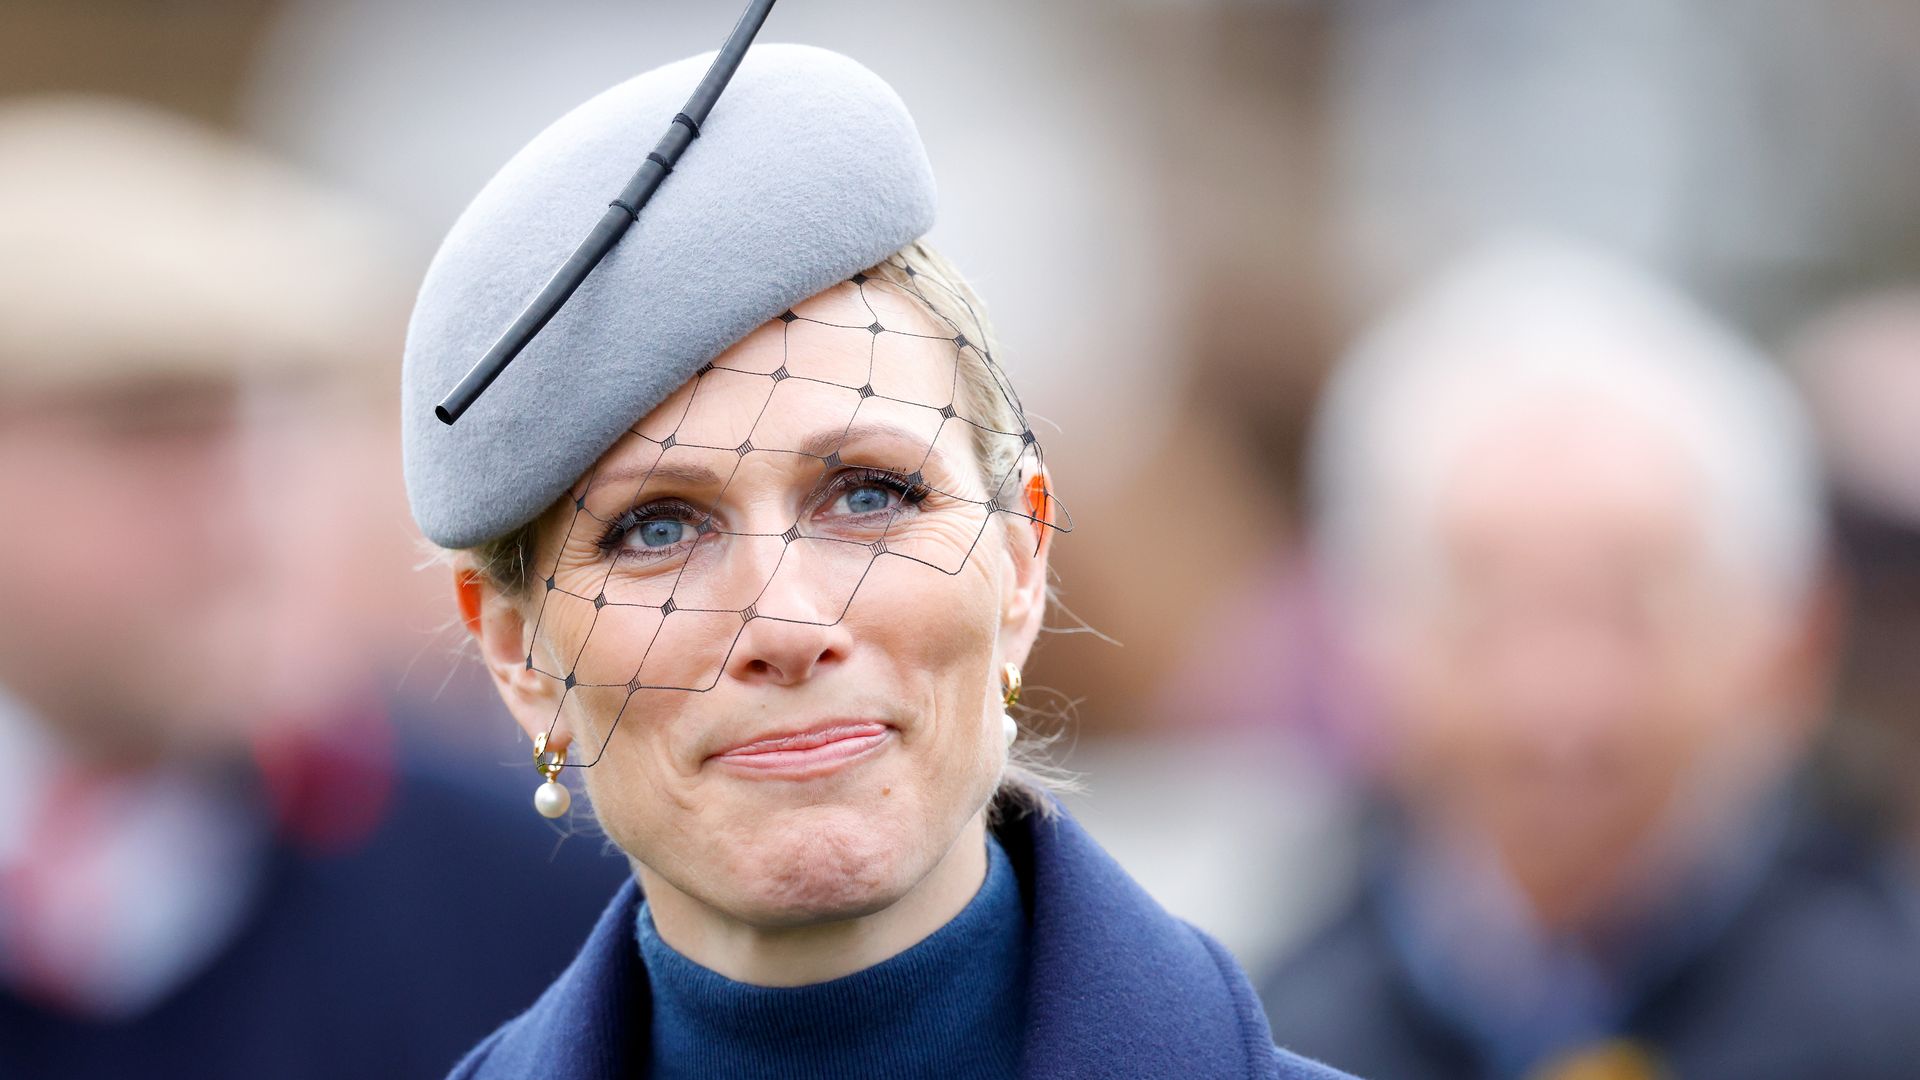 Zara Tindall in a blue coat and matching teal beret